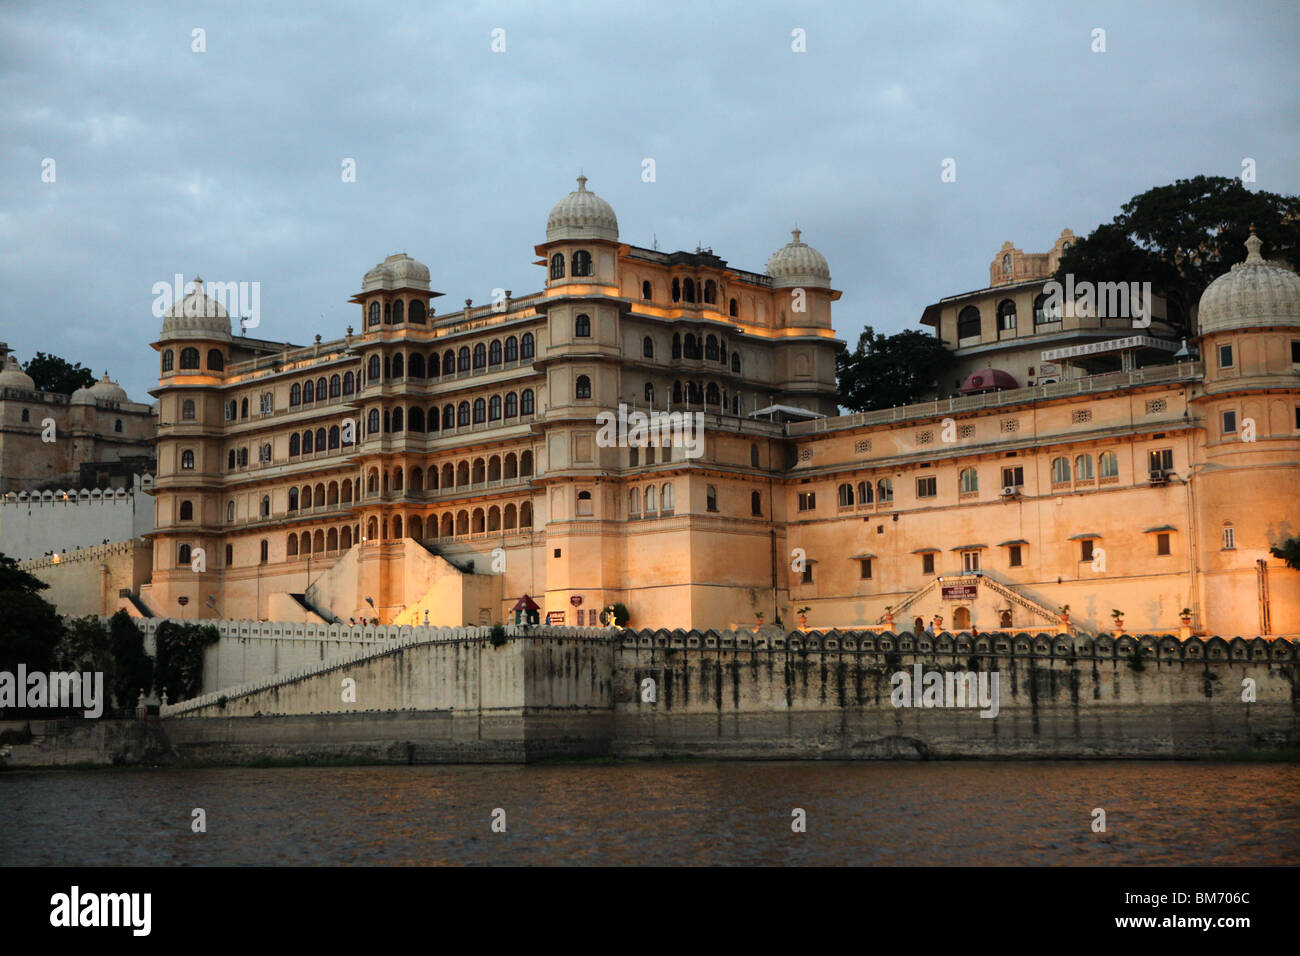 View over Lake Pichola towards the City Palace in Udaipur, Rajasthan in India. Stock Photo